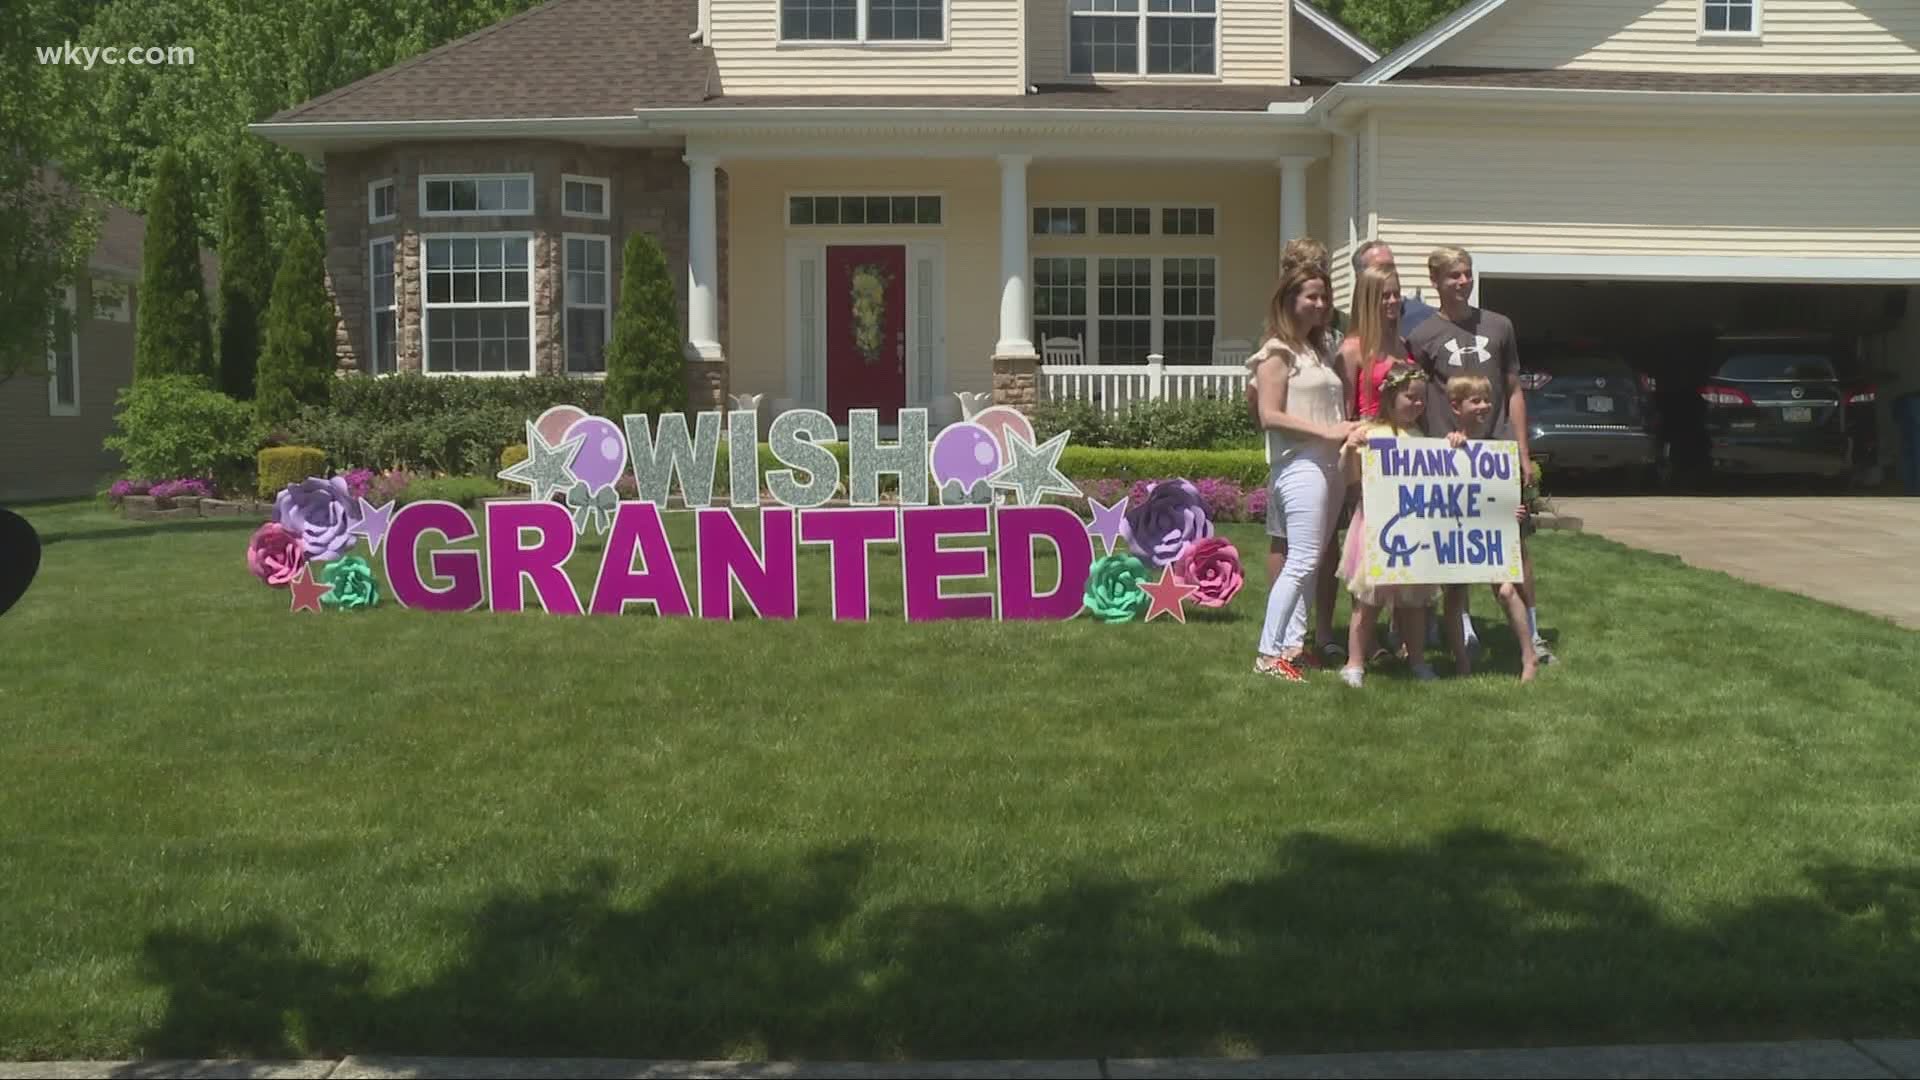 It was a wish come true in Willoughby for 10-year-old Ava O’Keeffe. A drive-by parade was held Tuesday as she got a bedroom makeover.